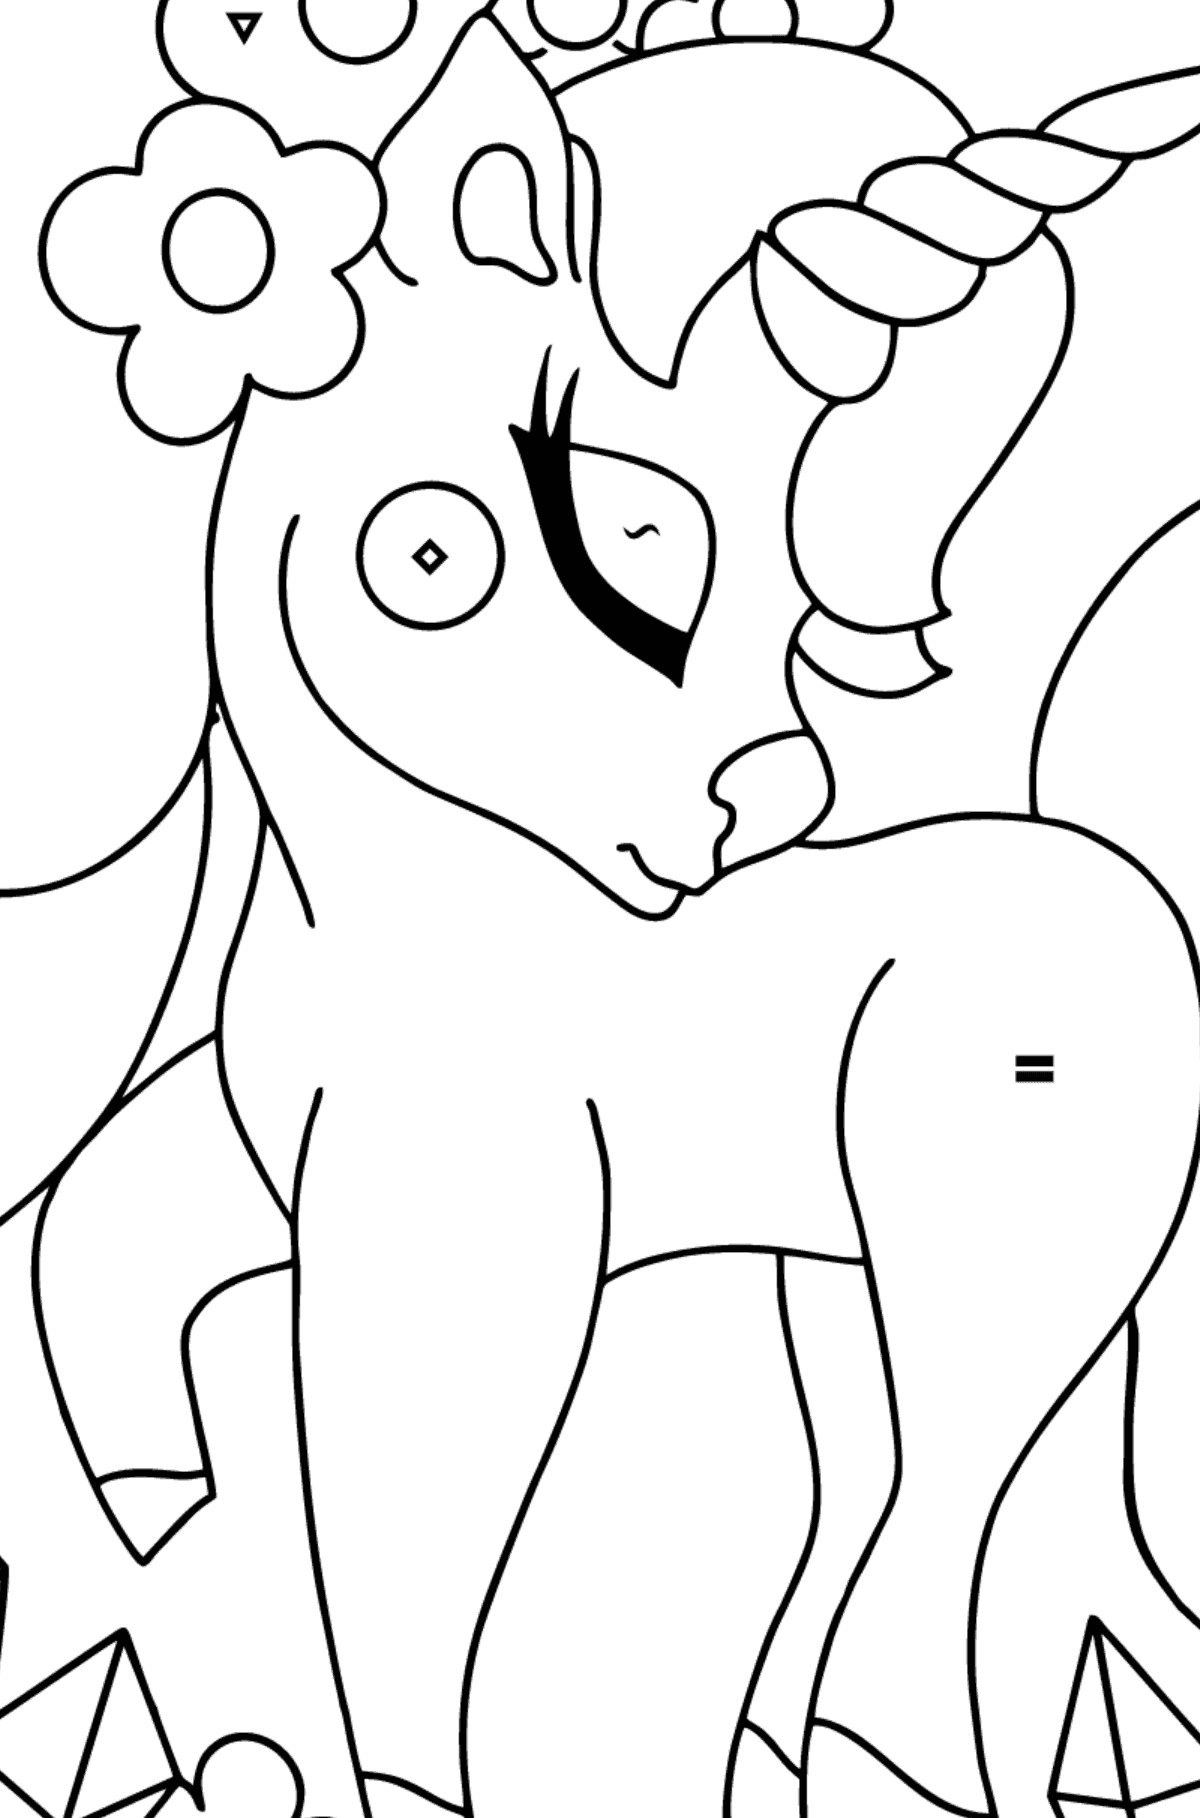 Simple Unicorn Coloring Book for Kids - Coloring by Symbols for Kids